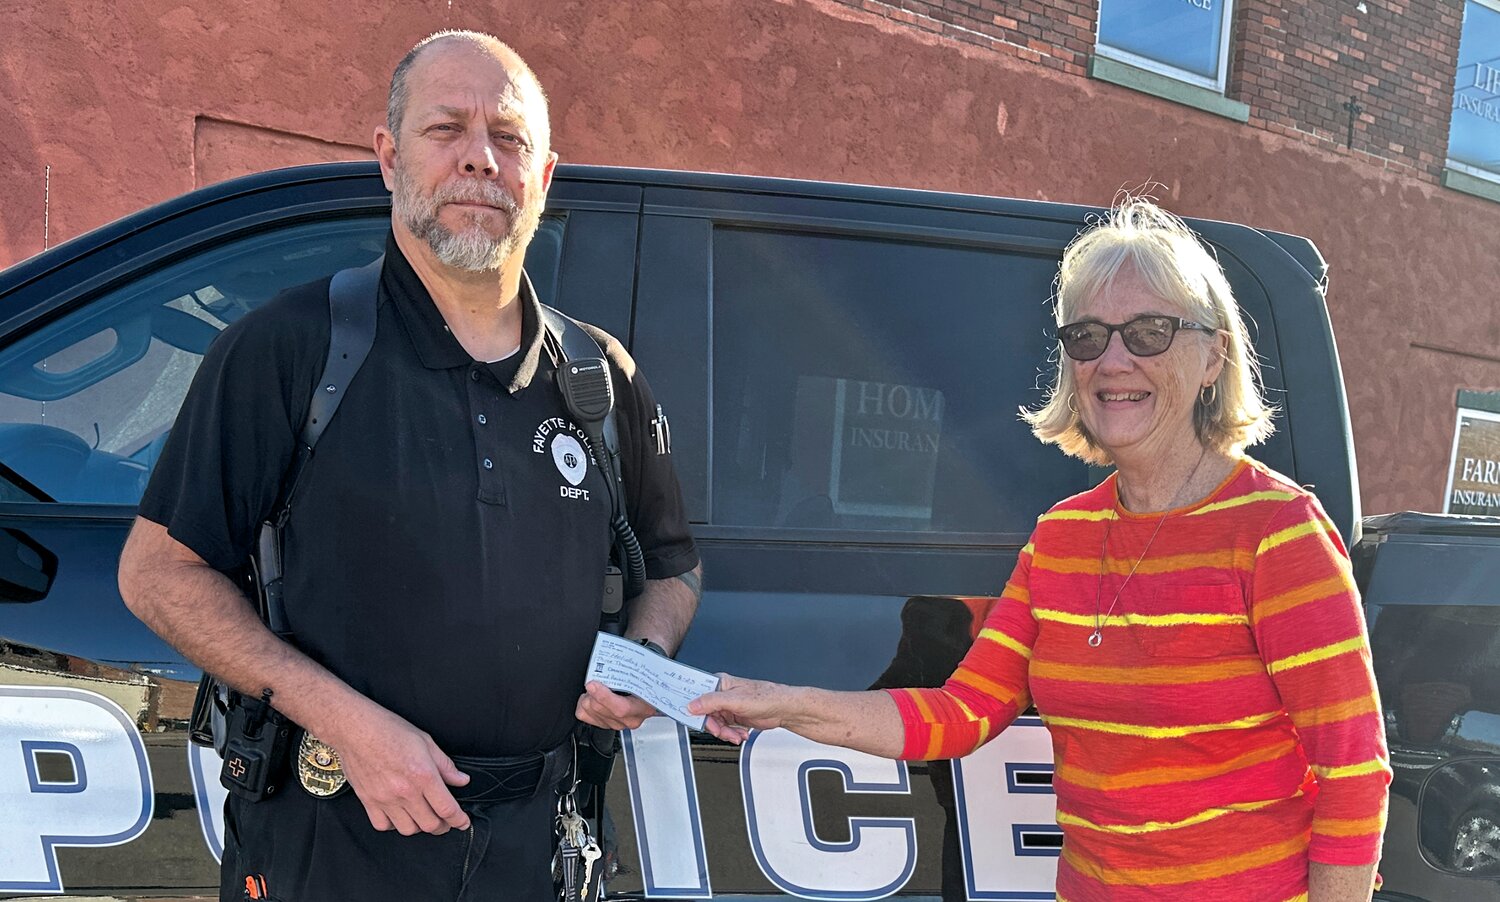 Fayette City Marshal David Ford handed a check in the amount of $3,000 to Pat Hilgedick with the Holiday House. The funds were raised at the annual department’s Pork Steak Fundraiser held on Sunday, Nov. 11.